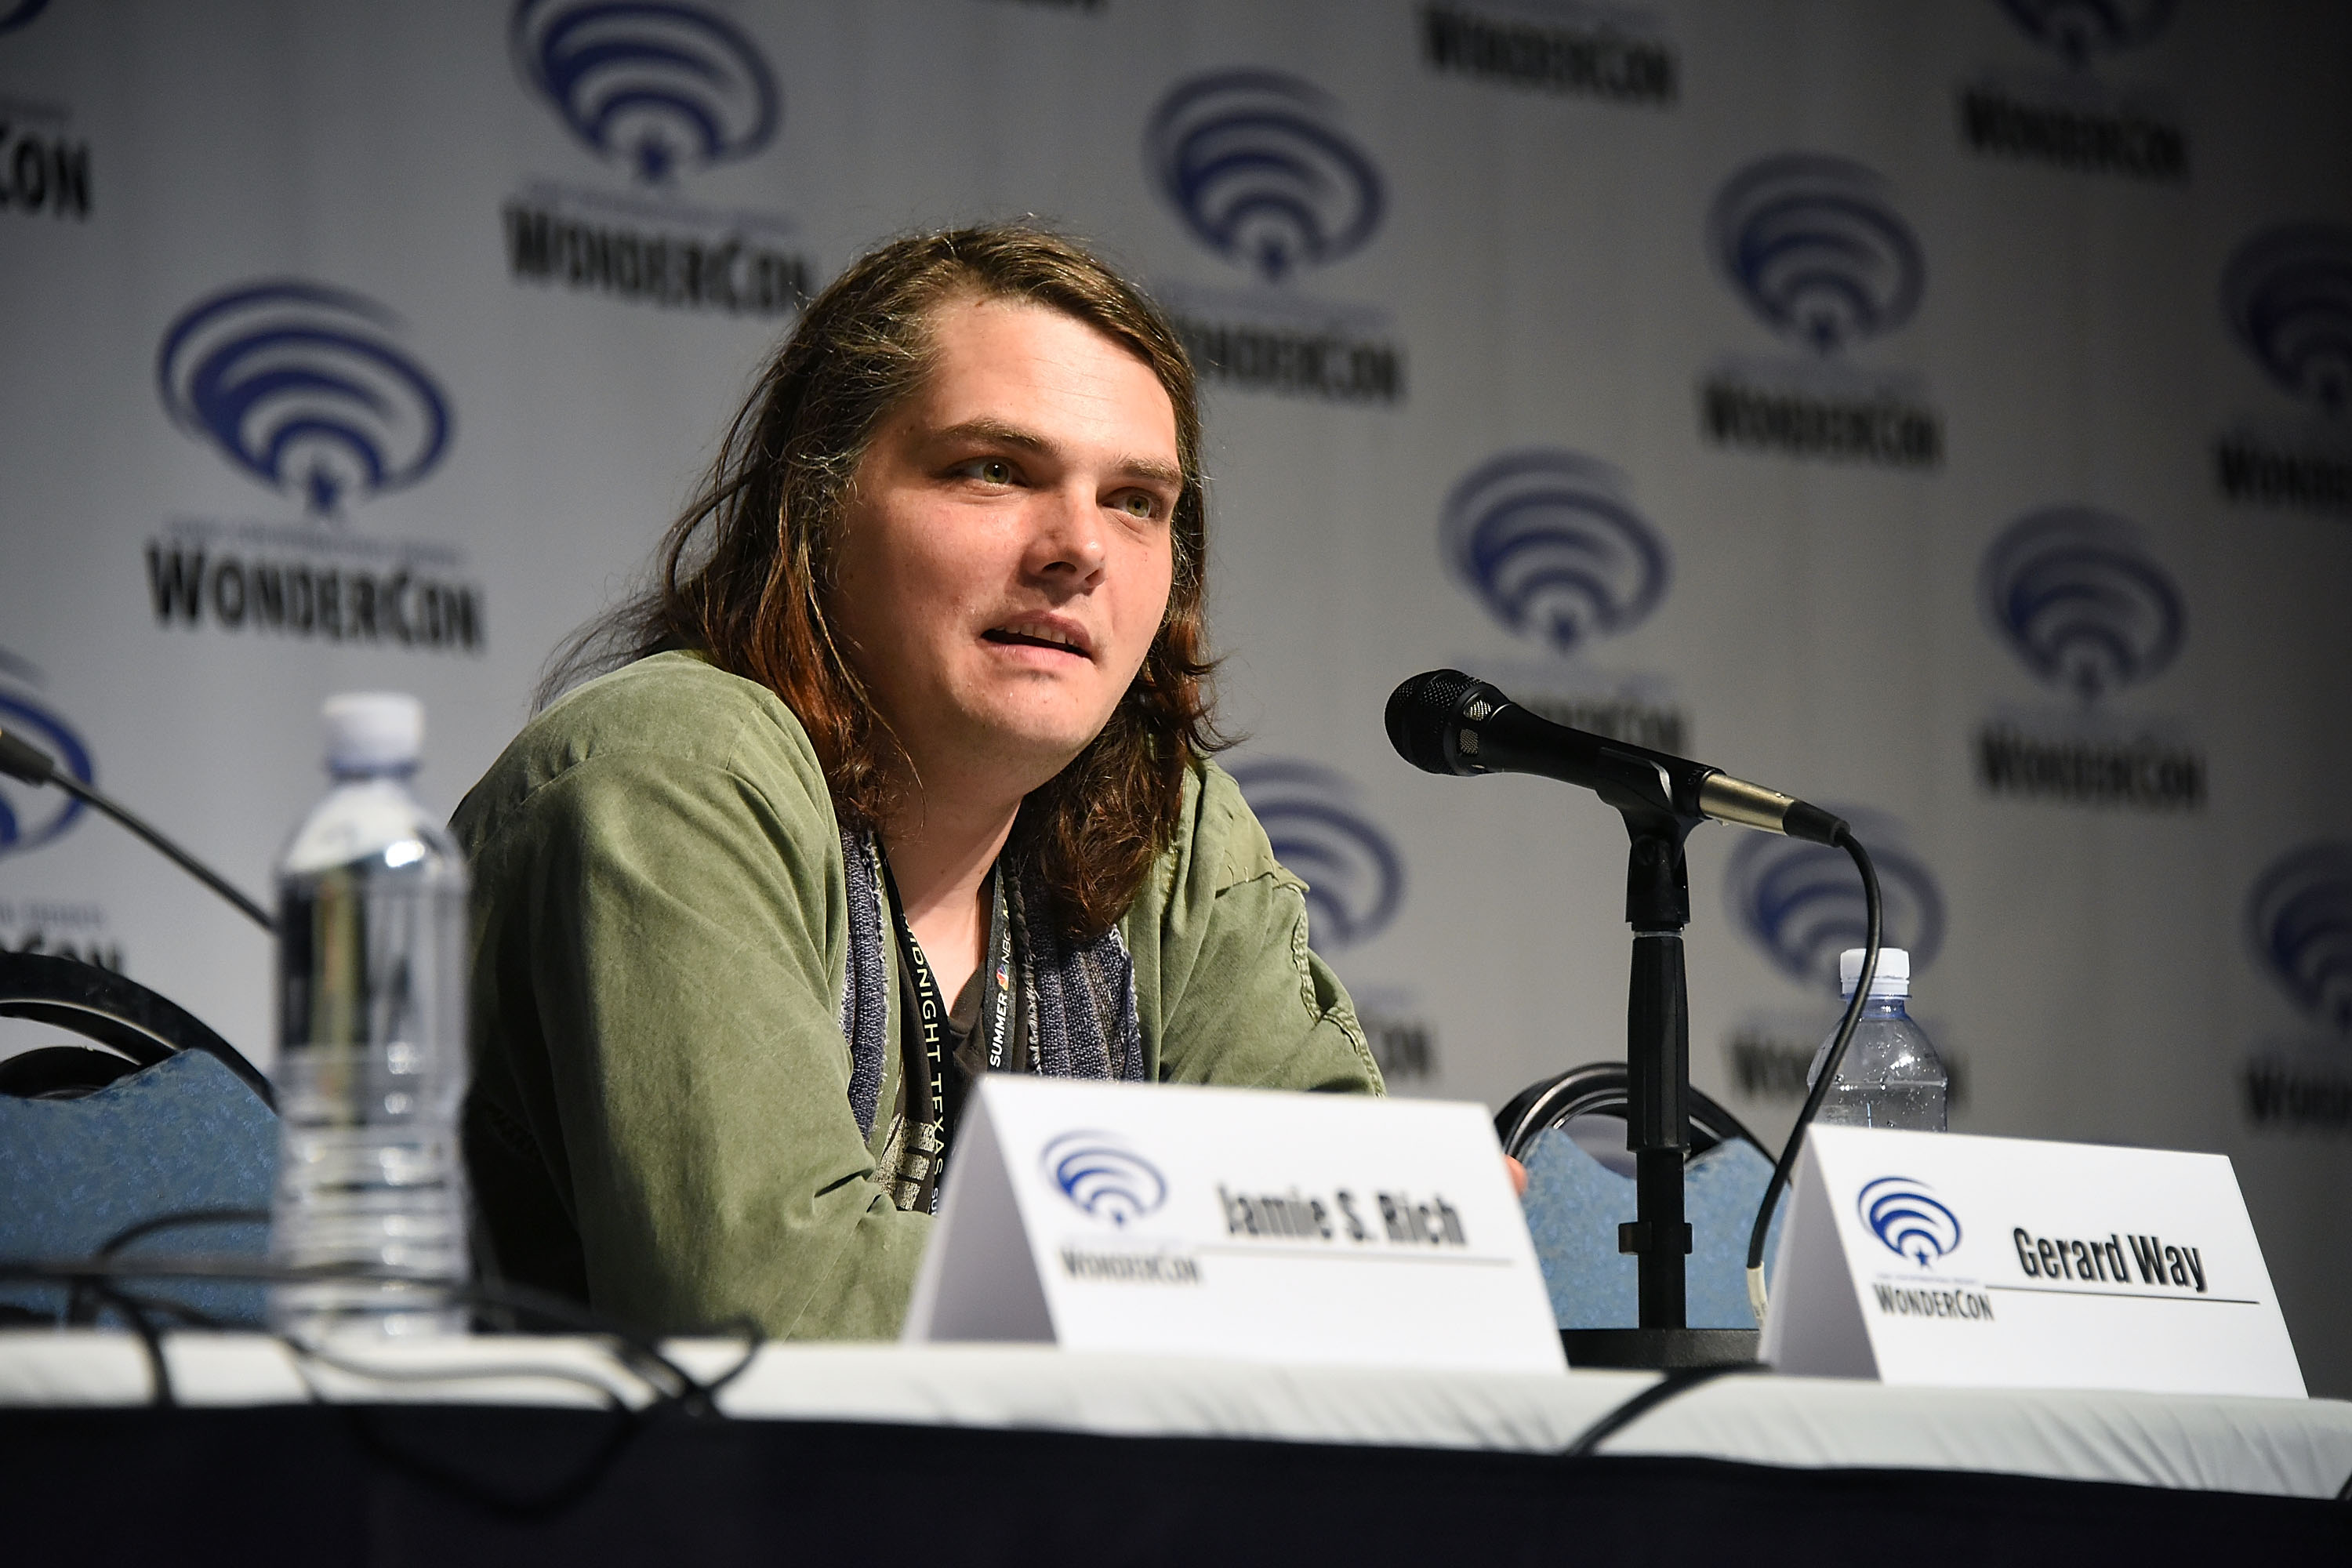 Gerard Way attends day two of WonderCon 2017